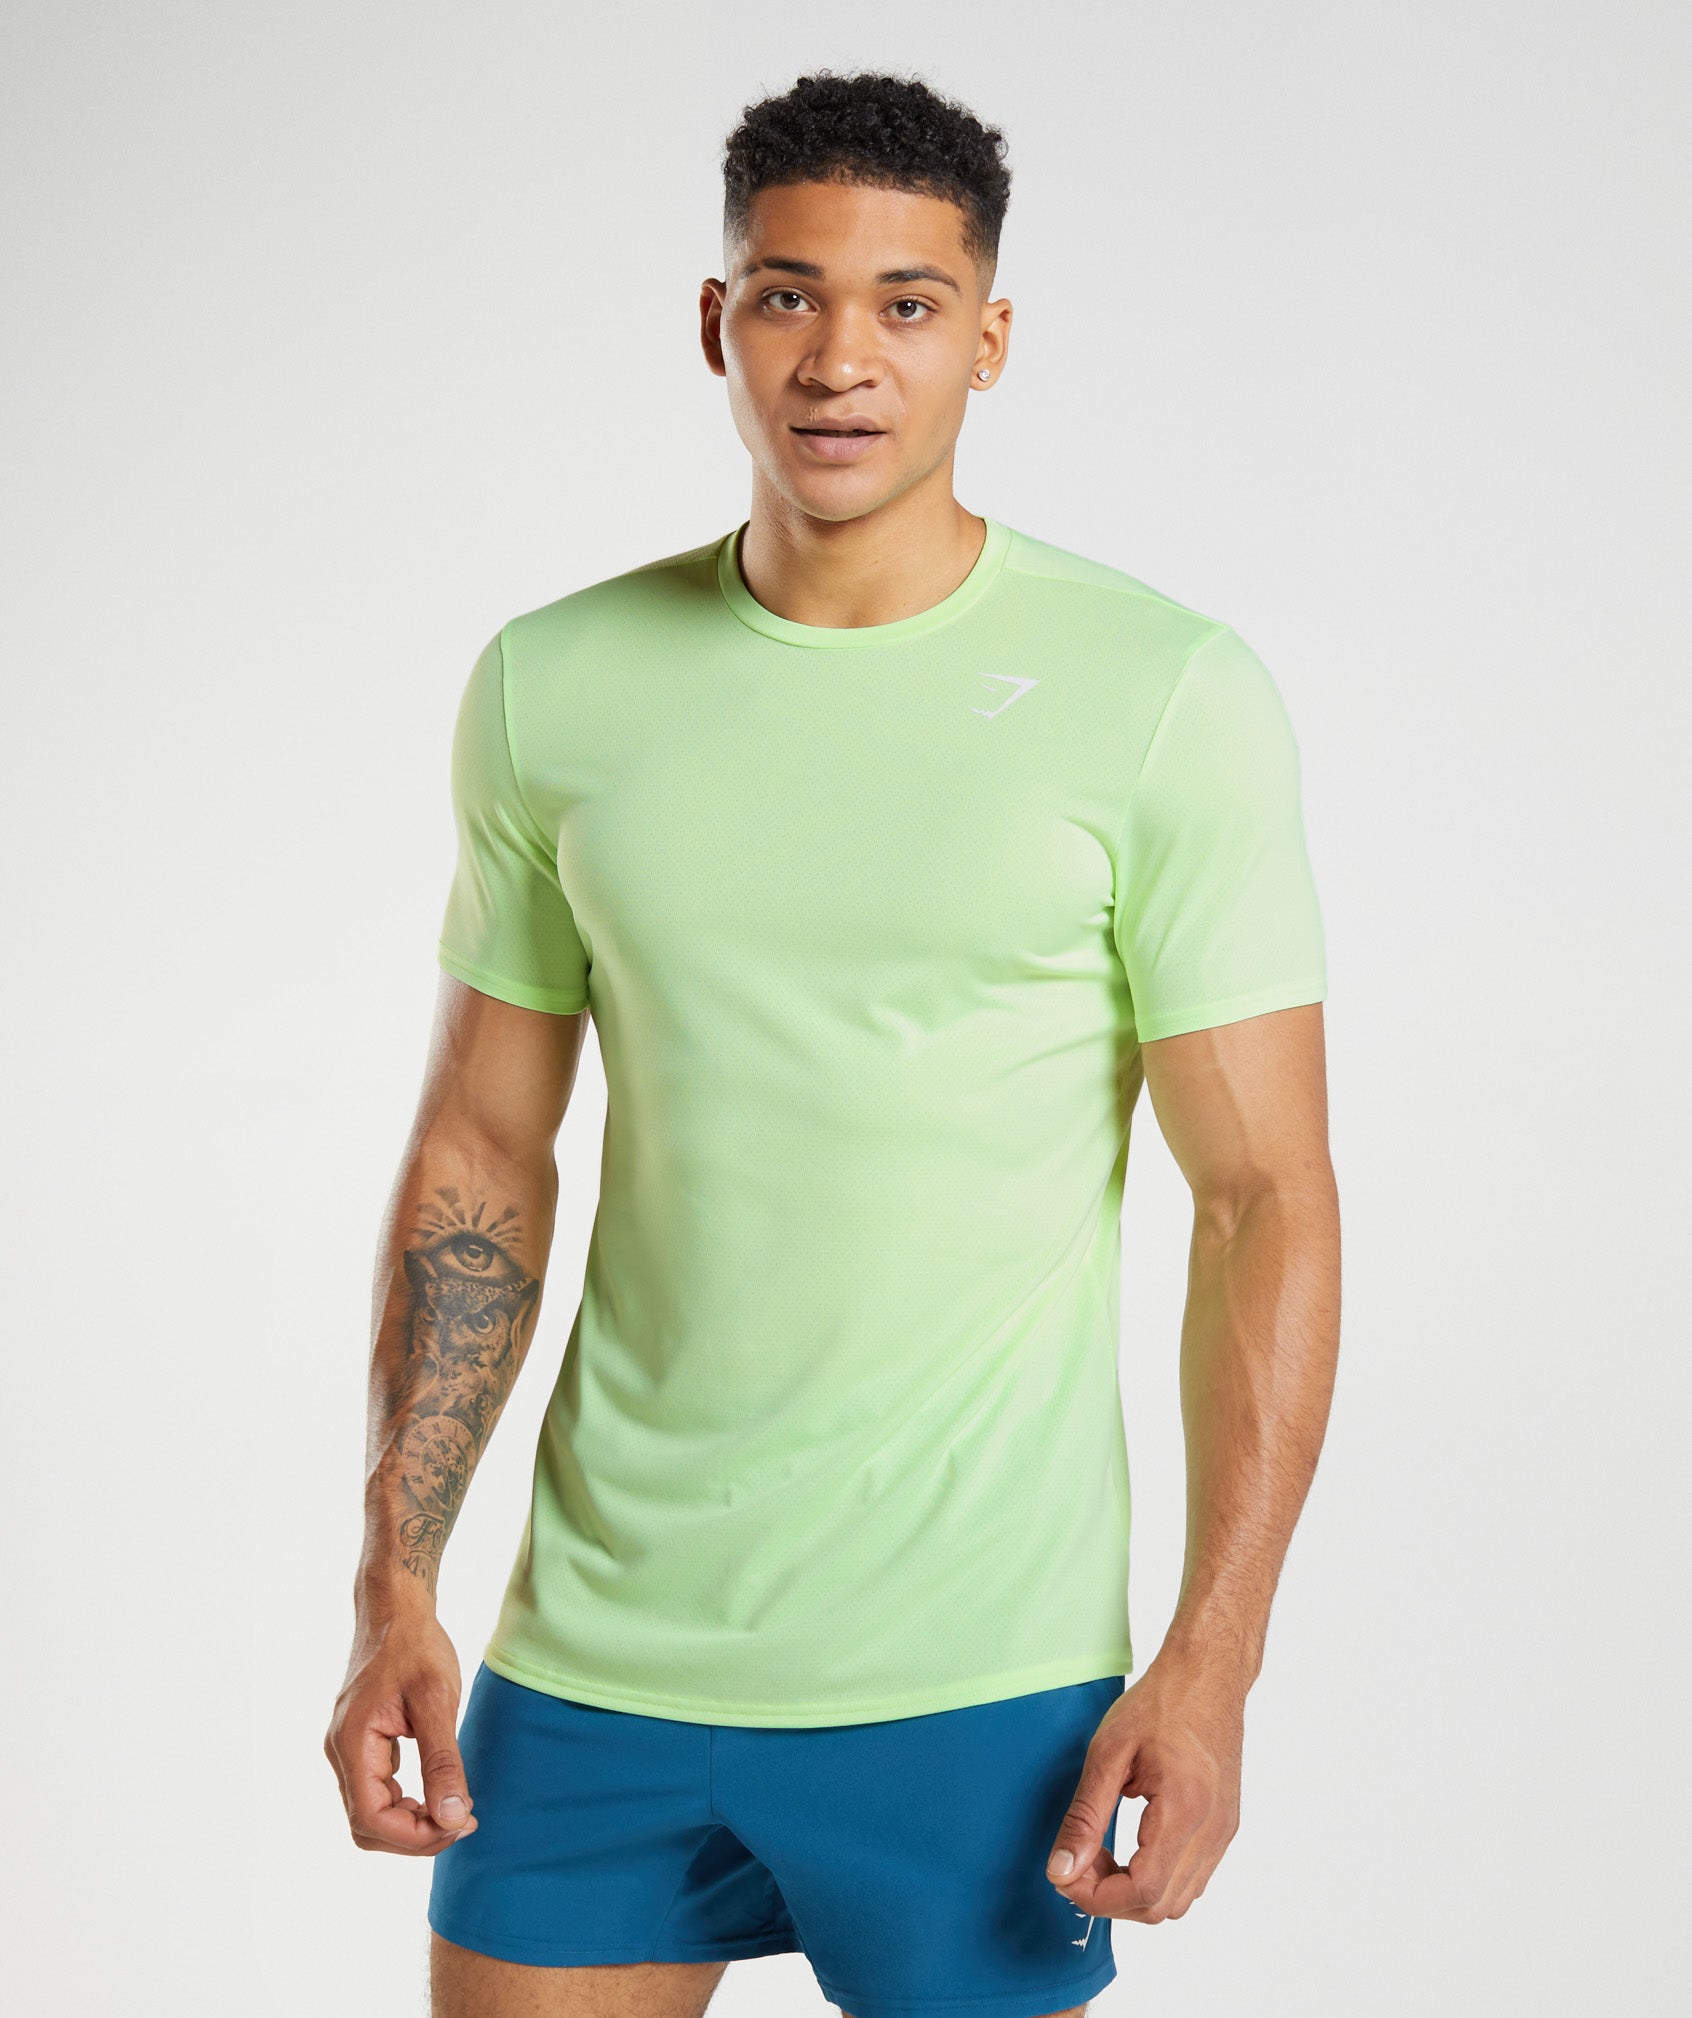 Arrival T-Shirt in Fluo Mint